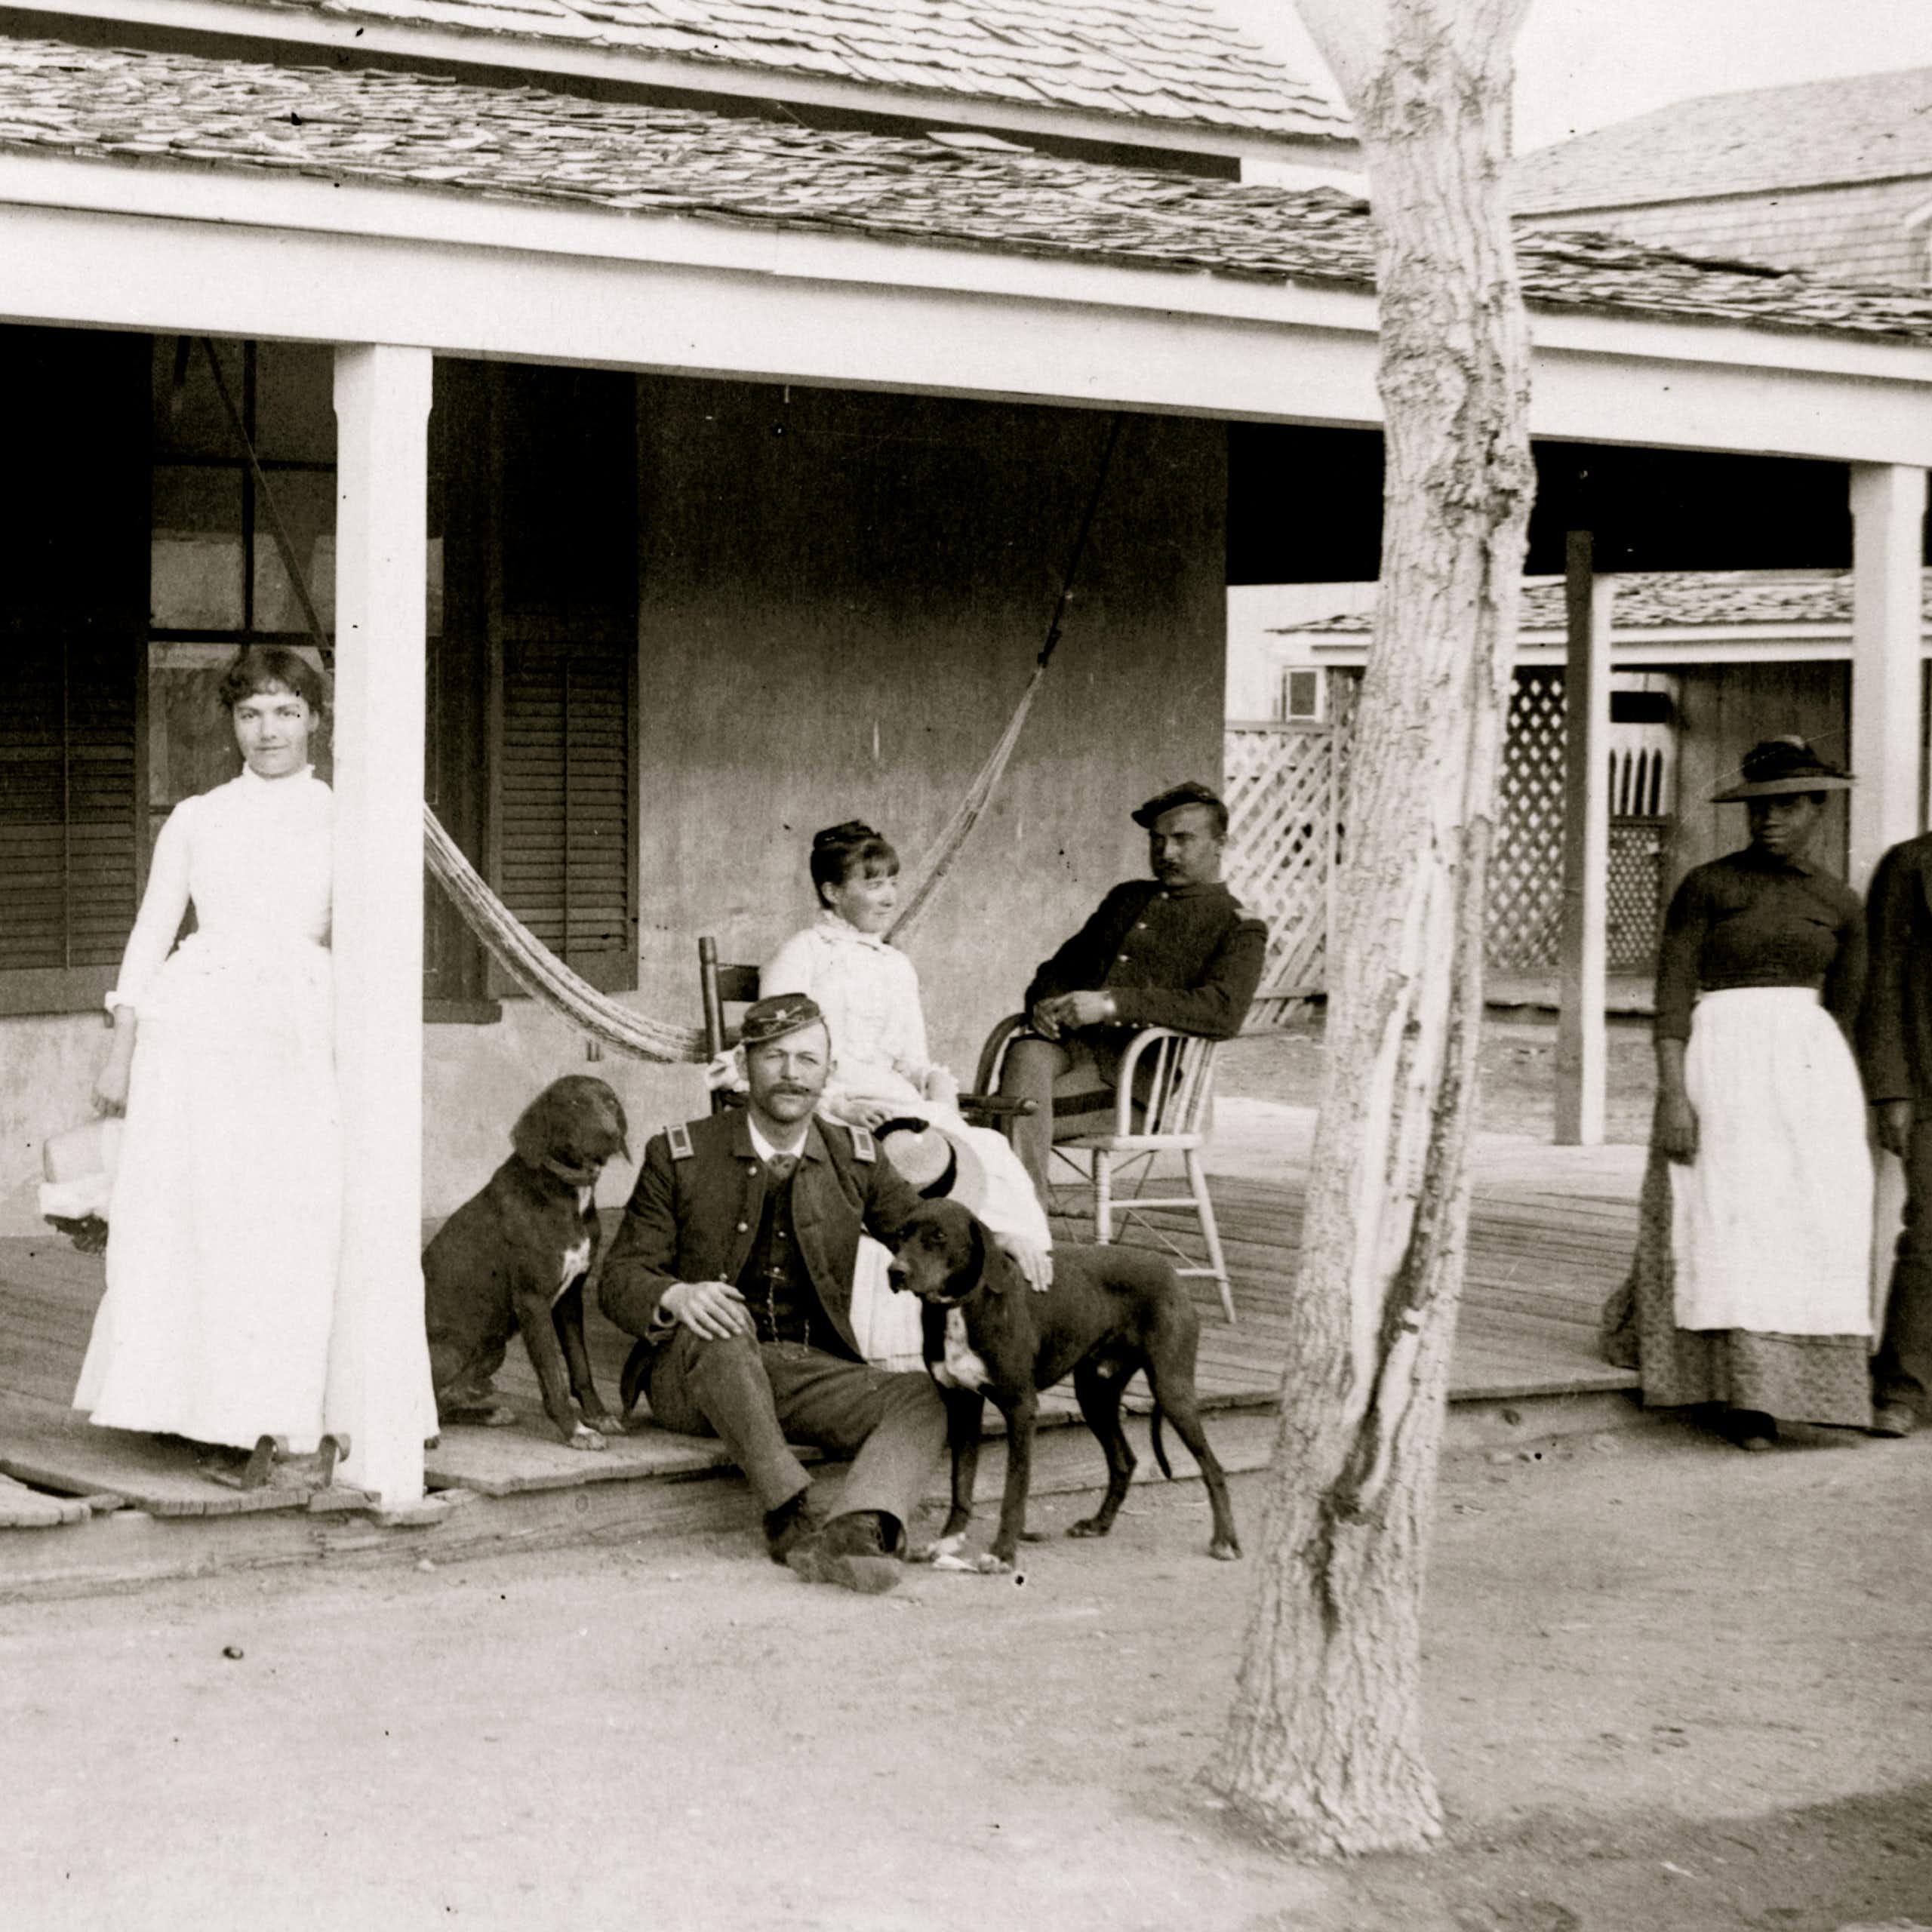 A black and white photo shows a white woman standing against a pillar, with two soldiers and dogs and another woman seated nearby her. A Black man and woman stand off to the side. 